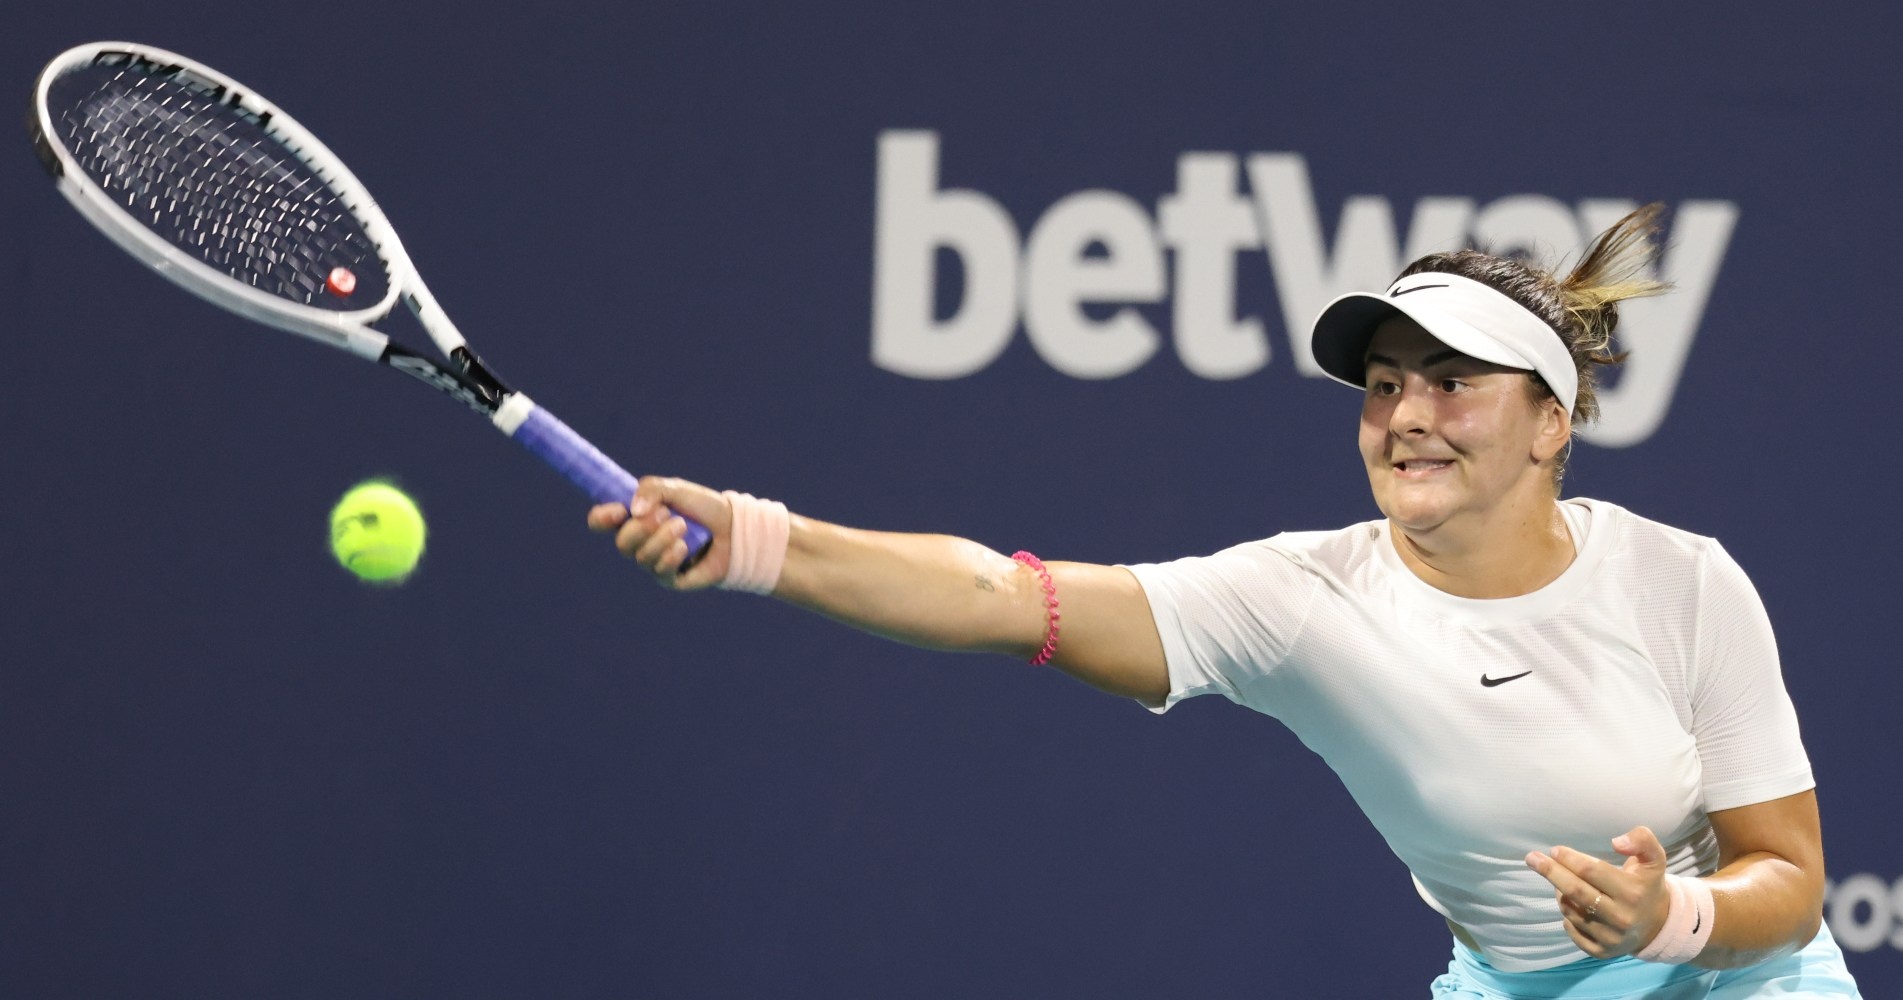 Andreescu reaches Miami Open semifinals with win over Sorribes Tormo